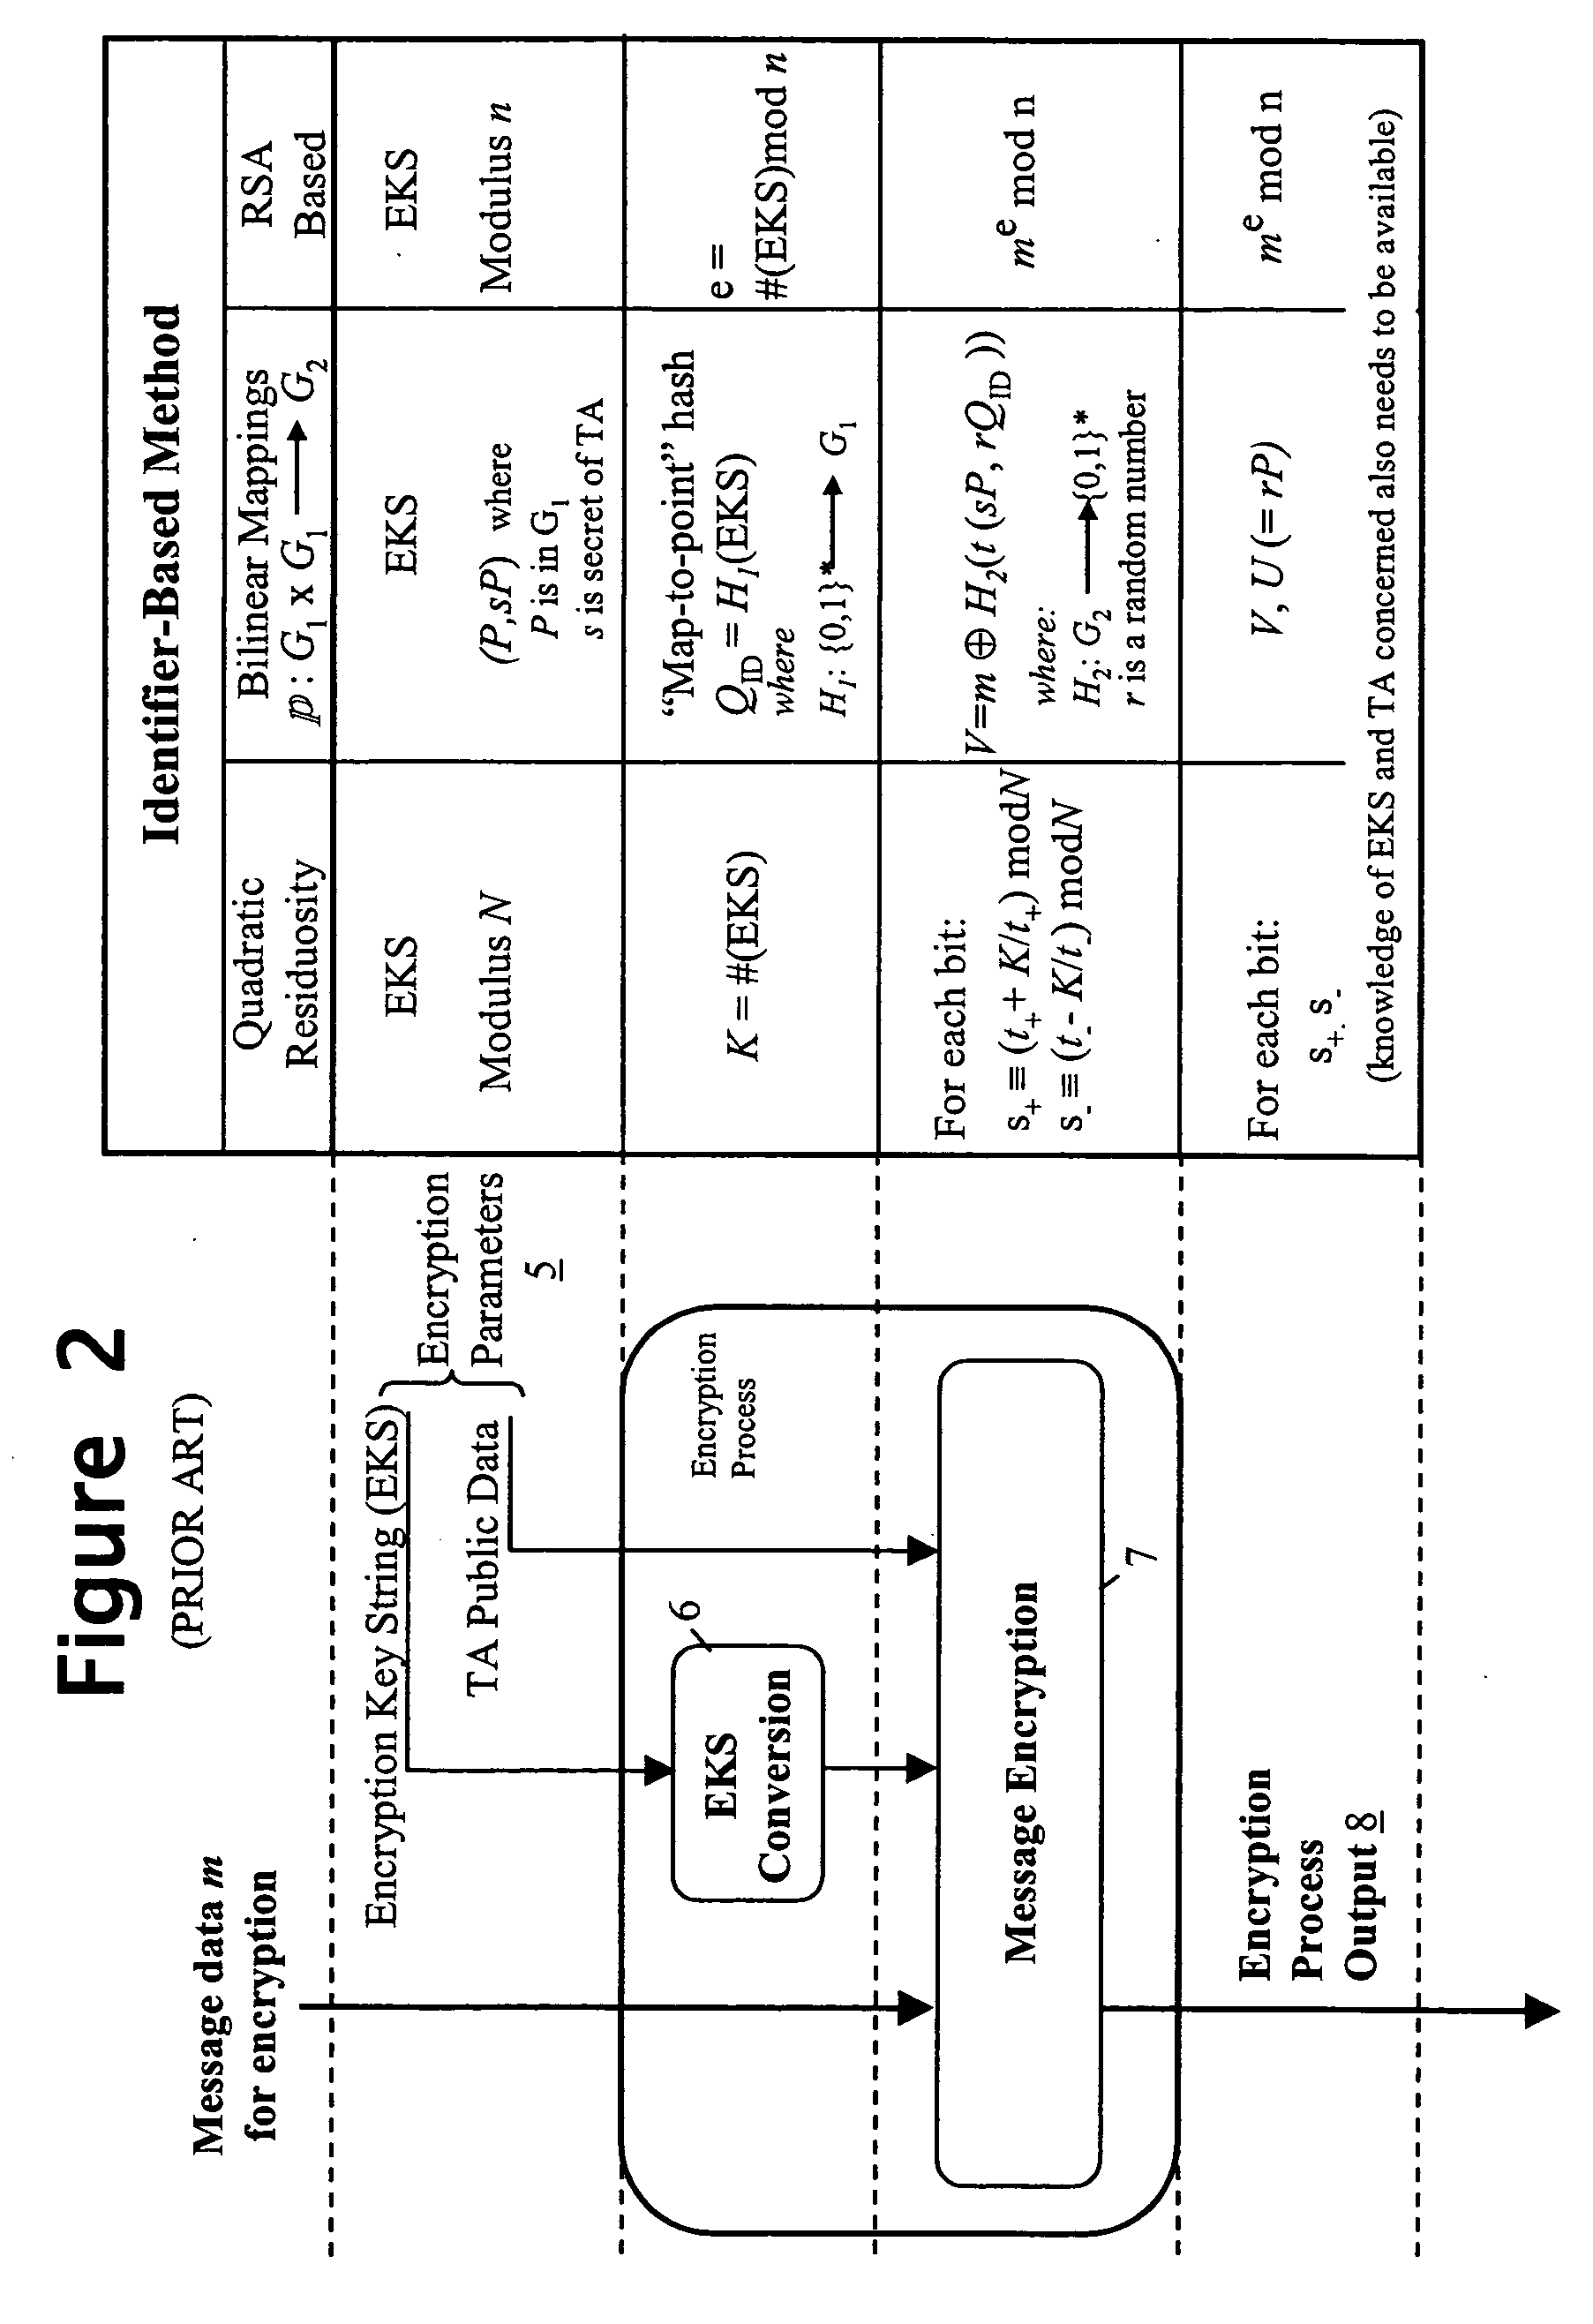 Method, system and device for enabling delegation of authority and access control methods based on delegated authority